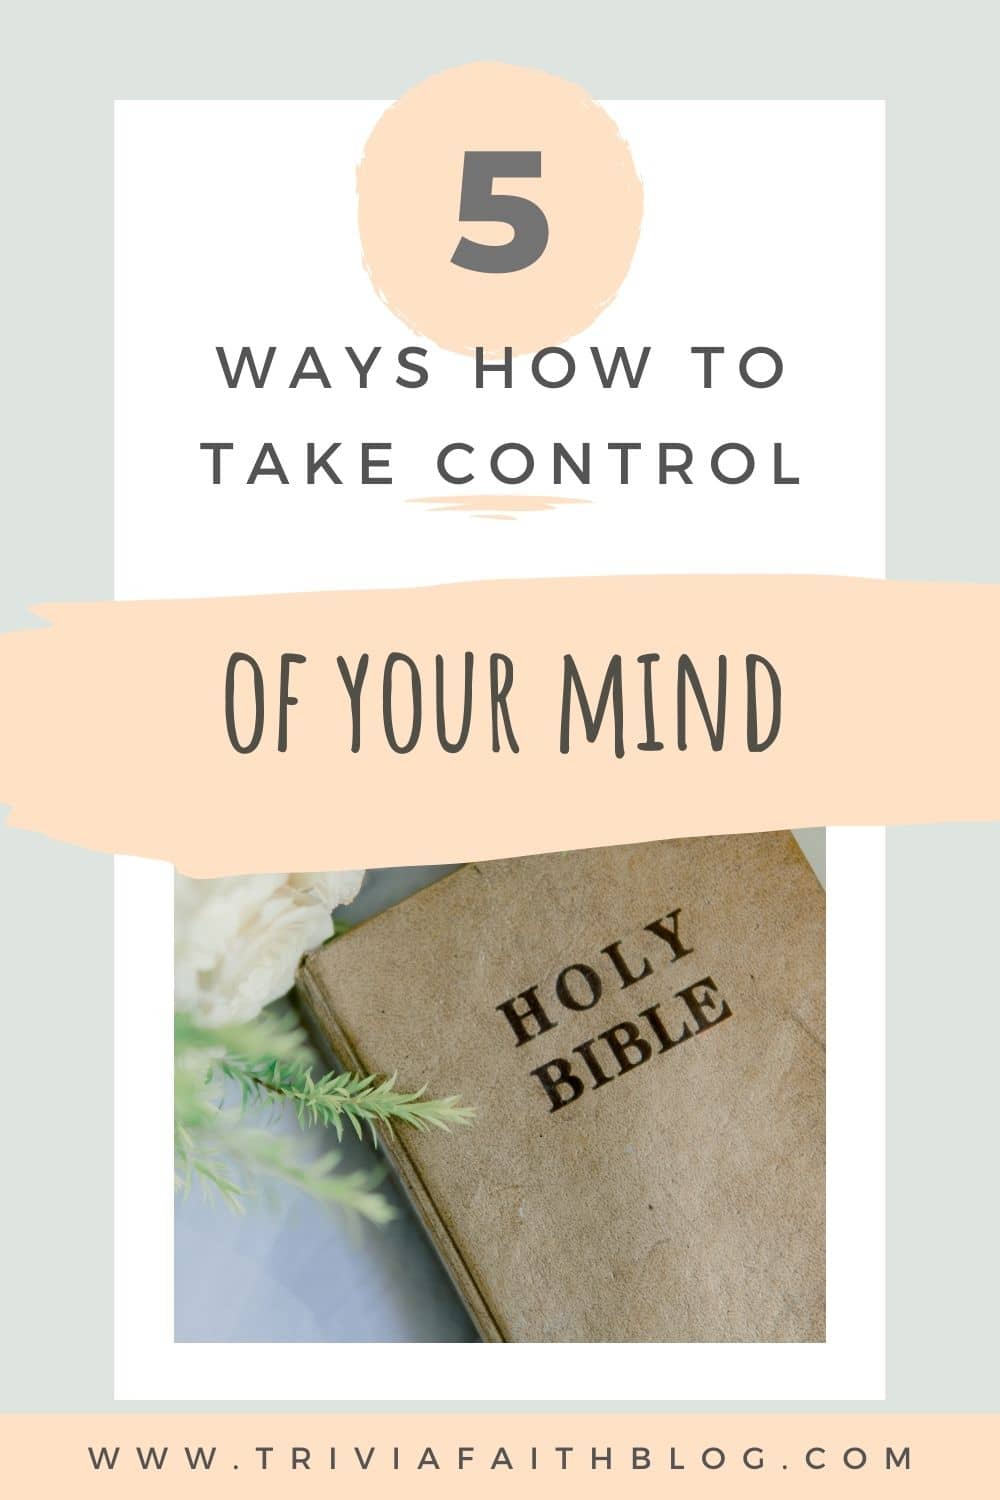 Ways To Take Control Of Your Mind and Thoughts